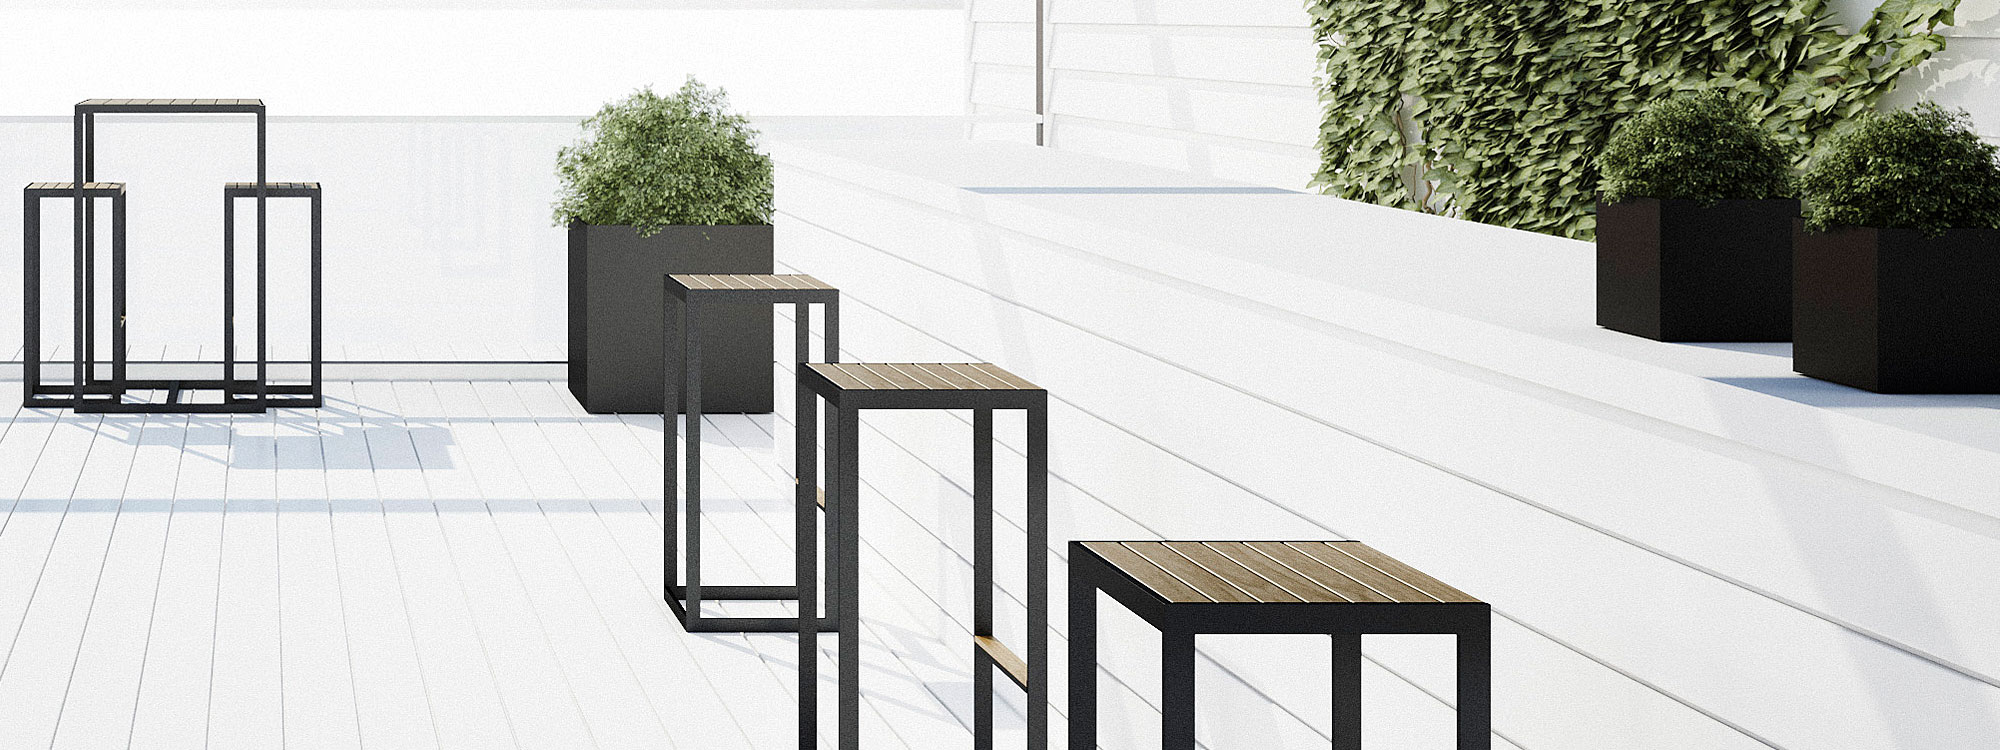 Garden Bar furniture includes a modern bar table & minimalist bar stool in all-weather furniture materials by Roshults outdoor furniture